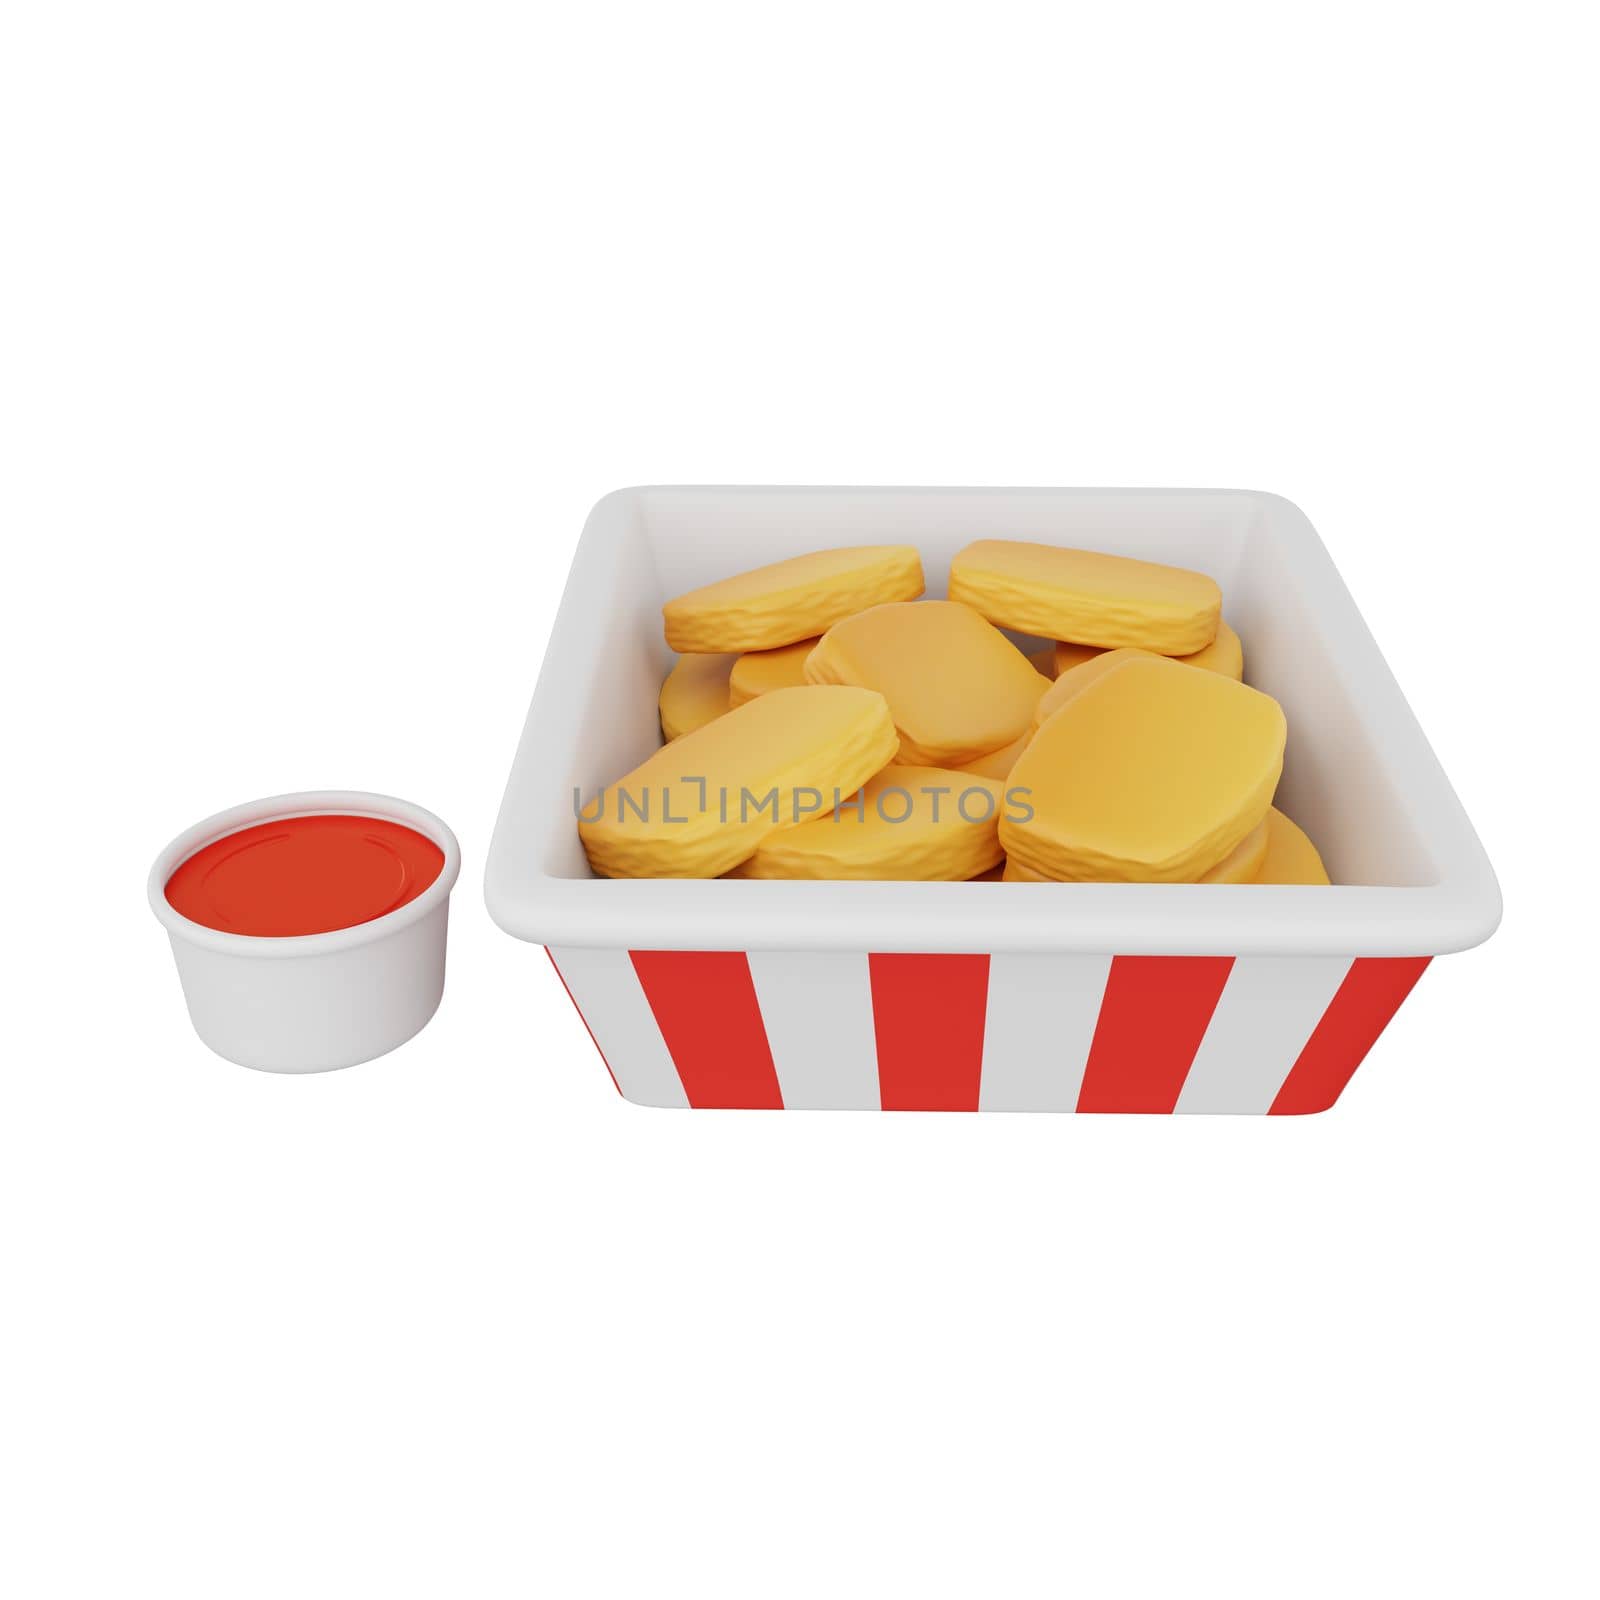 3d rendering of nuggets fast food icon